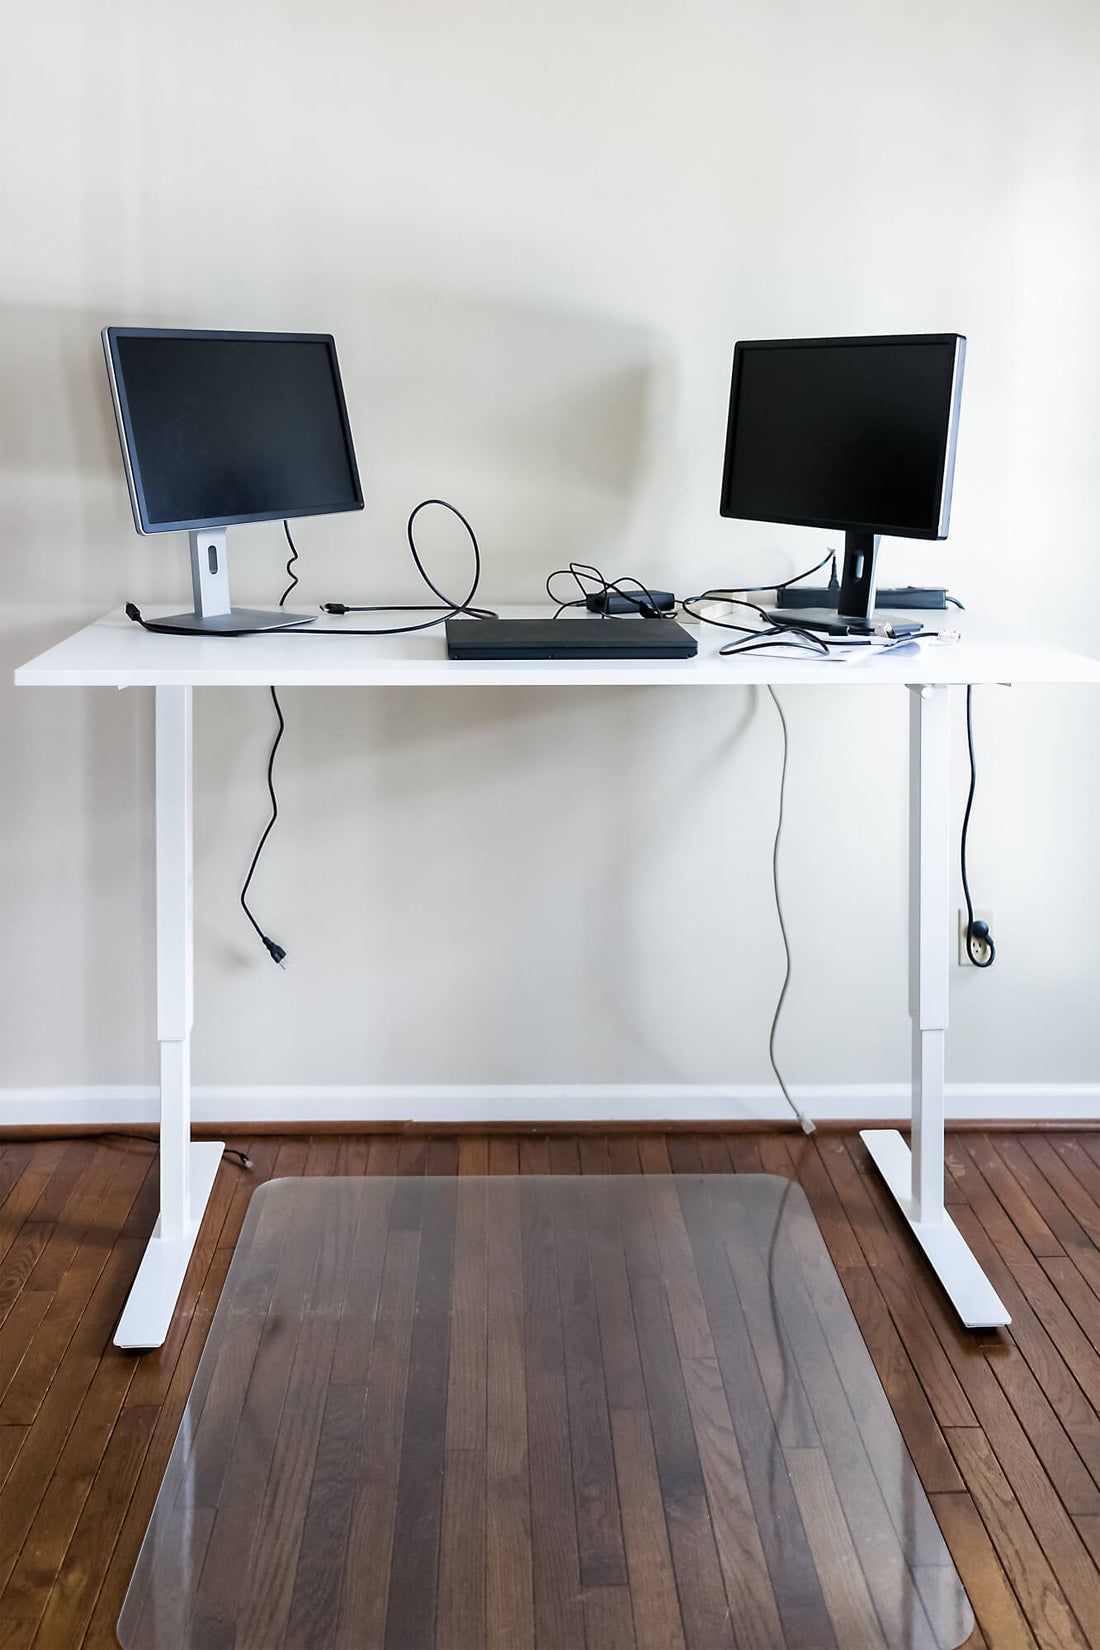 How to Select the Best Anti-Fatigue Standing Desk Mat for You